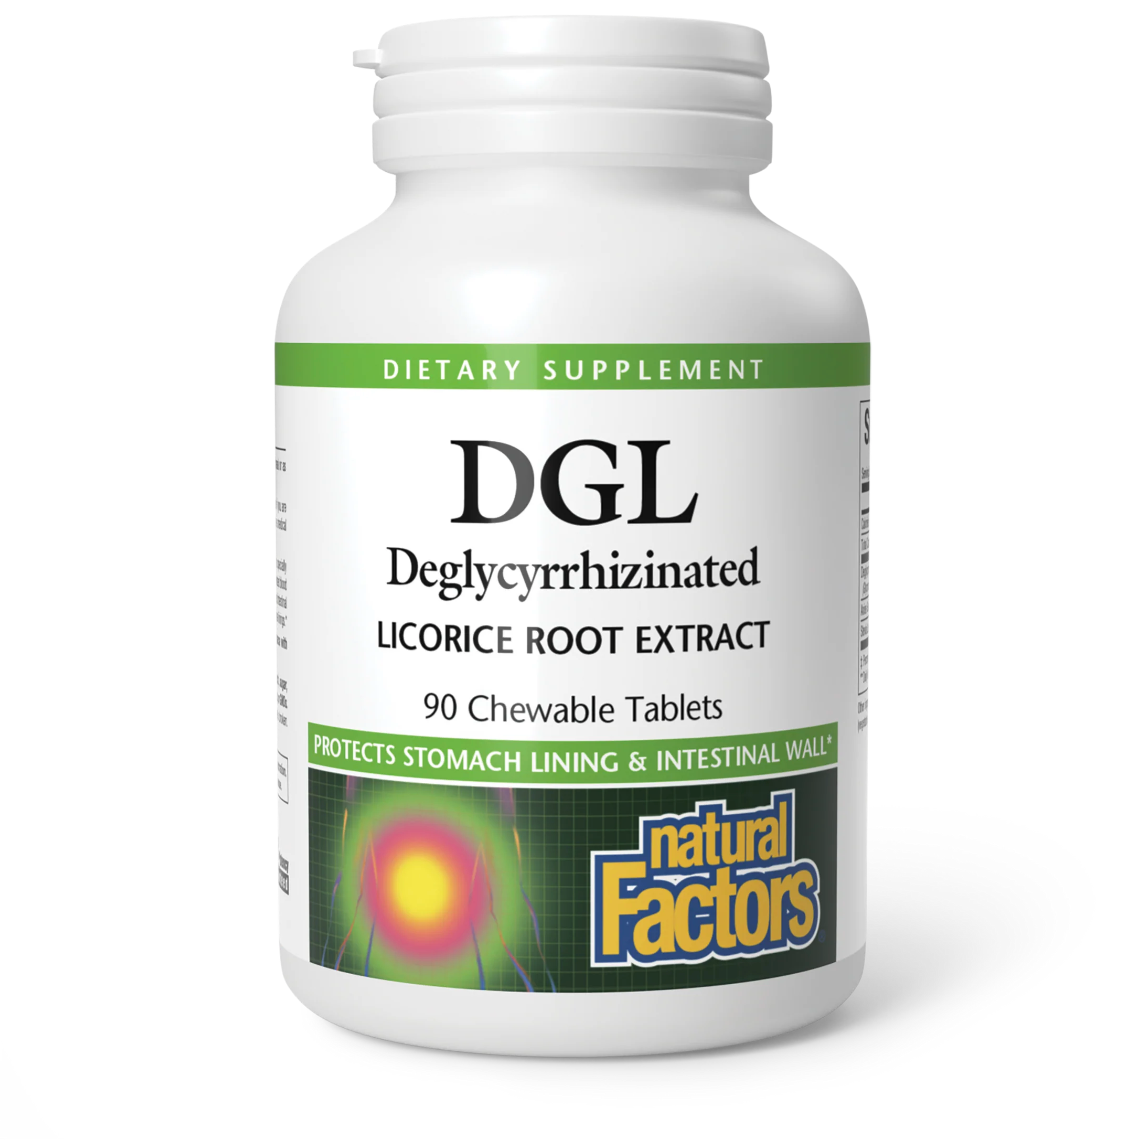 Natural Factors DGL (Deglycyrrhizinated Licorice) Root Extract, 90 Chewable Tablets